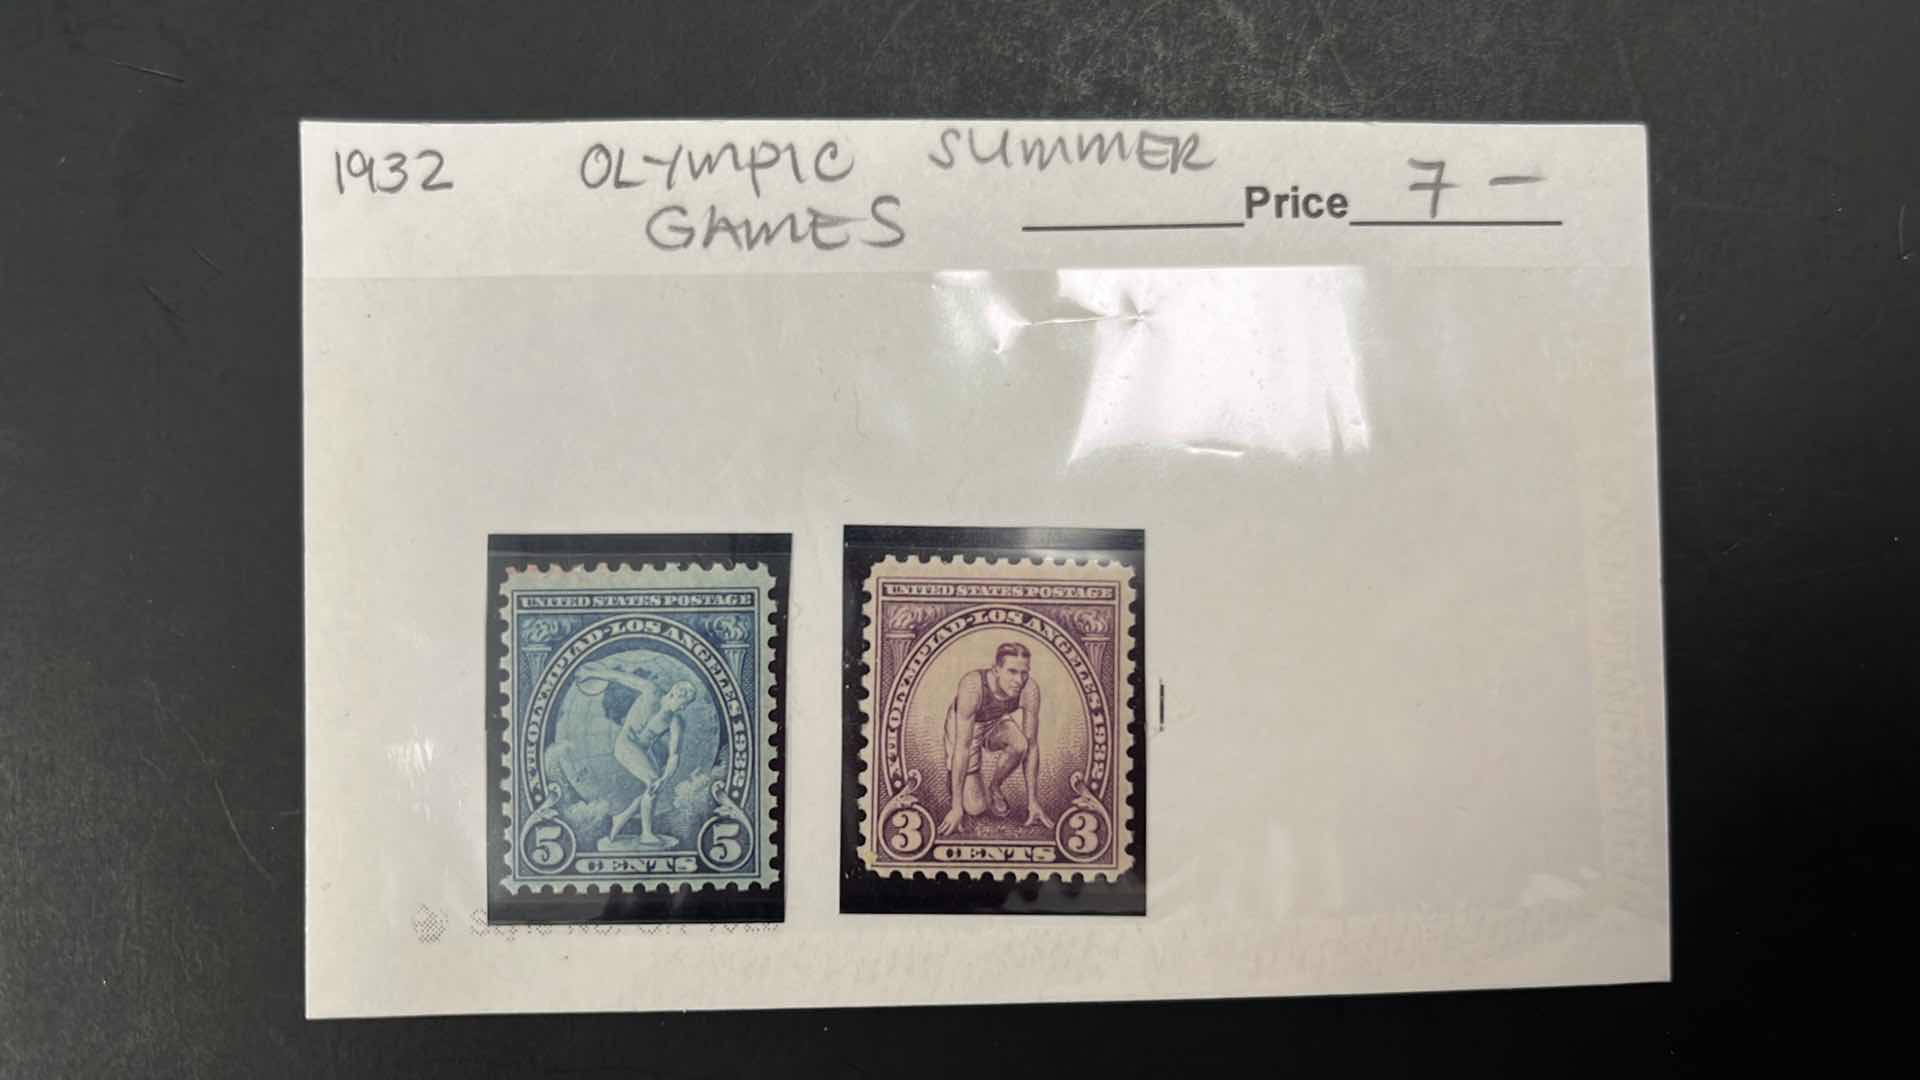 Photo 1 of STAMPS UNITED STATES VINTAGE OLYMPIC SUMMER GAMES  LOS ANGELES 1932 UNUSED